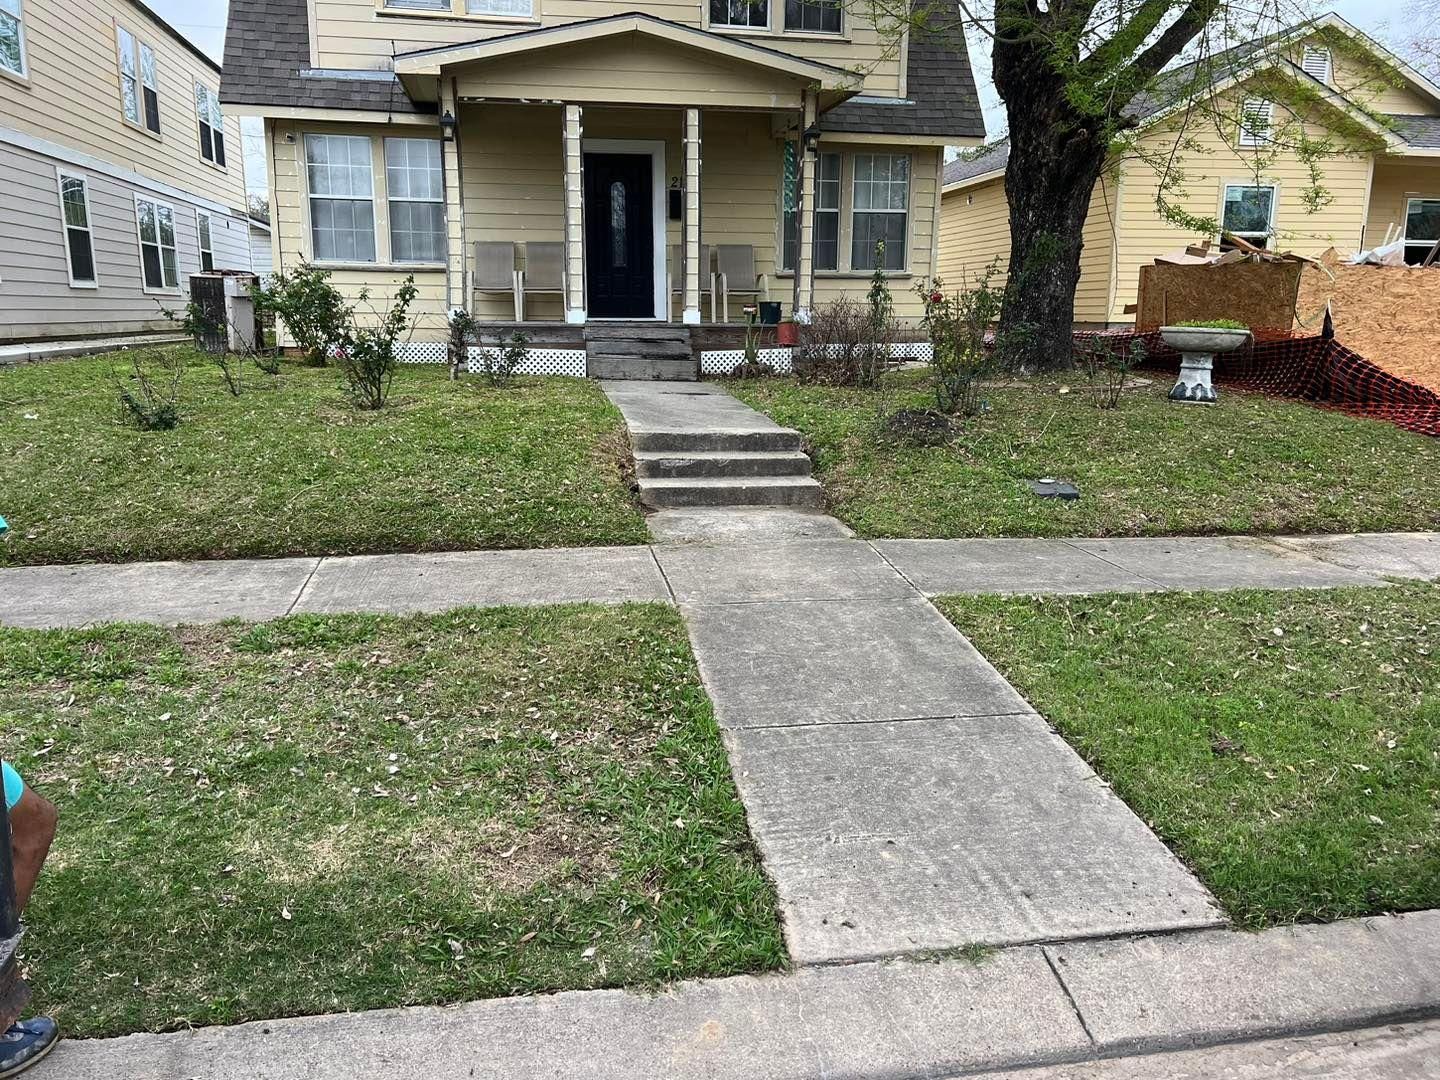 All Photos for Bobby’s lawn services in Baytown, TX